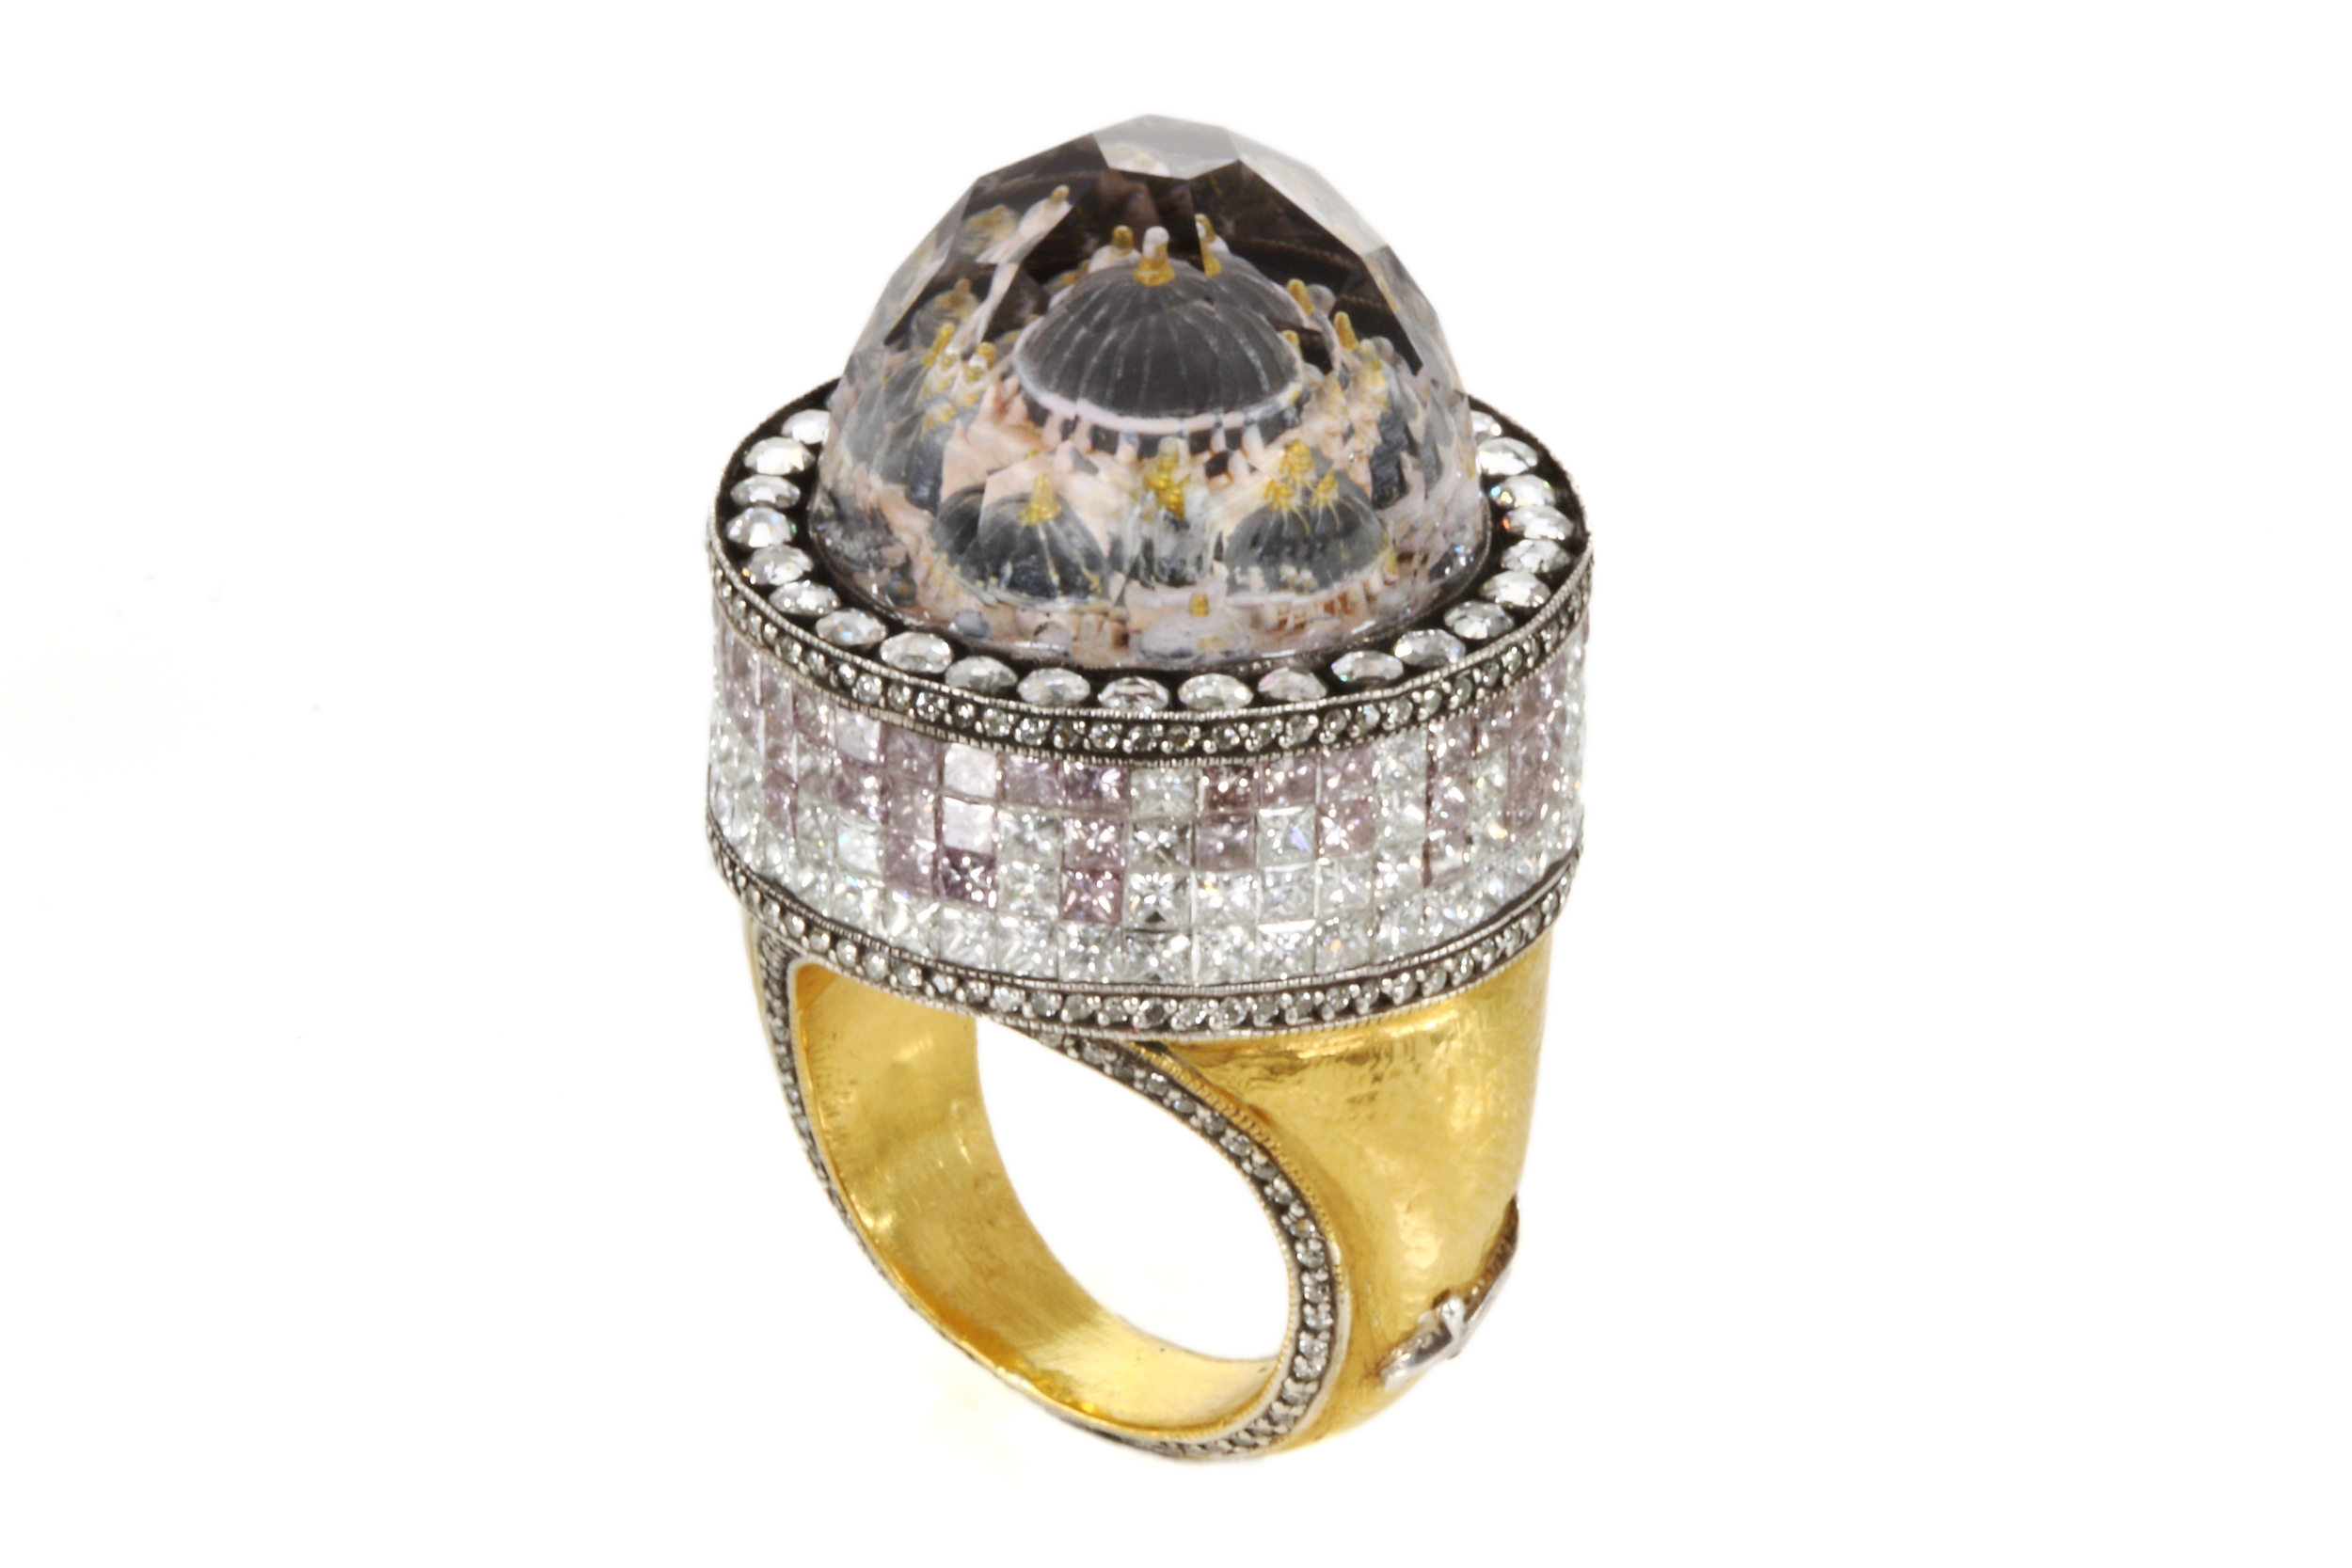 Sevan Bicacki, Sultan Mosque ring Gold, silver, diamonds, rock crystal with engraved intaglio inspired by Istanbul’s Sultan Mosques.jpg